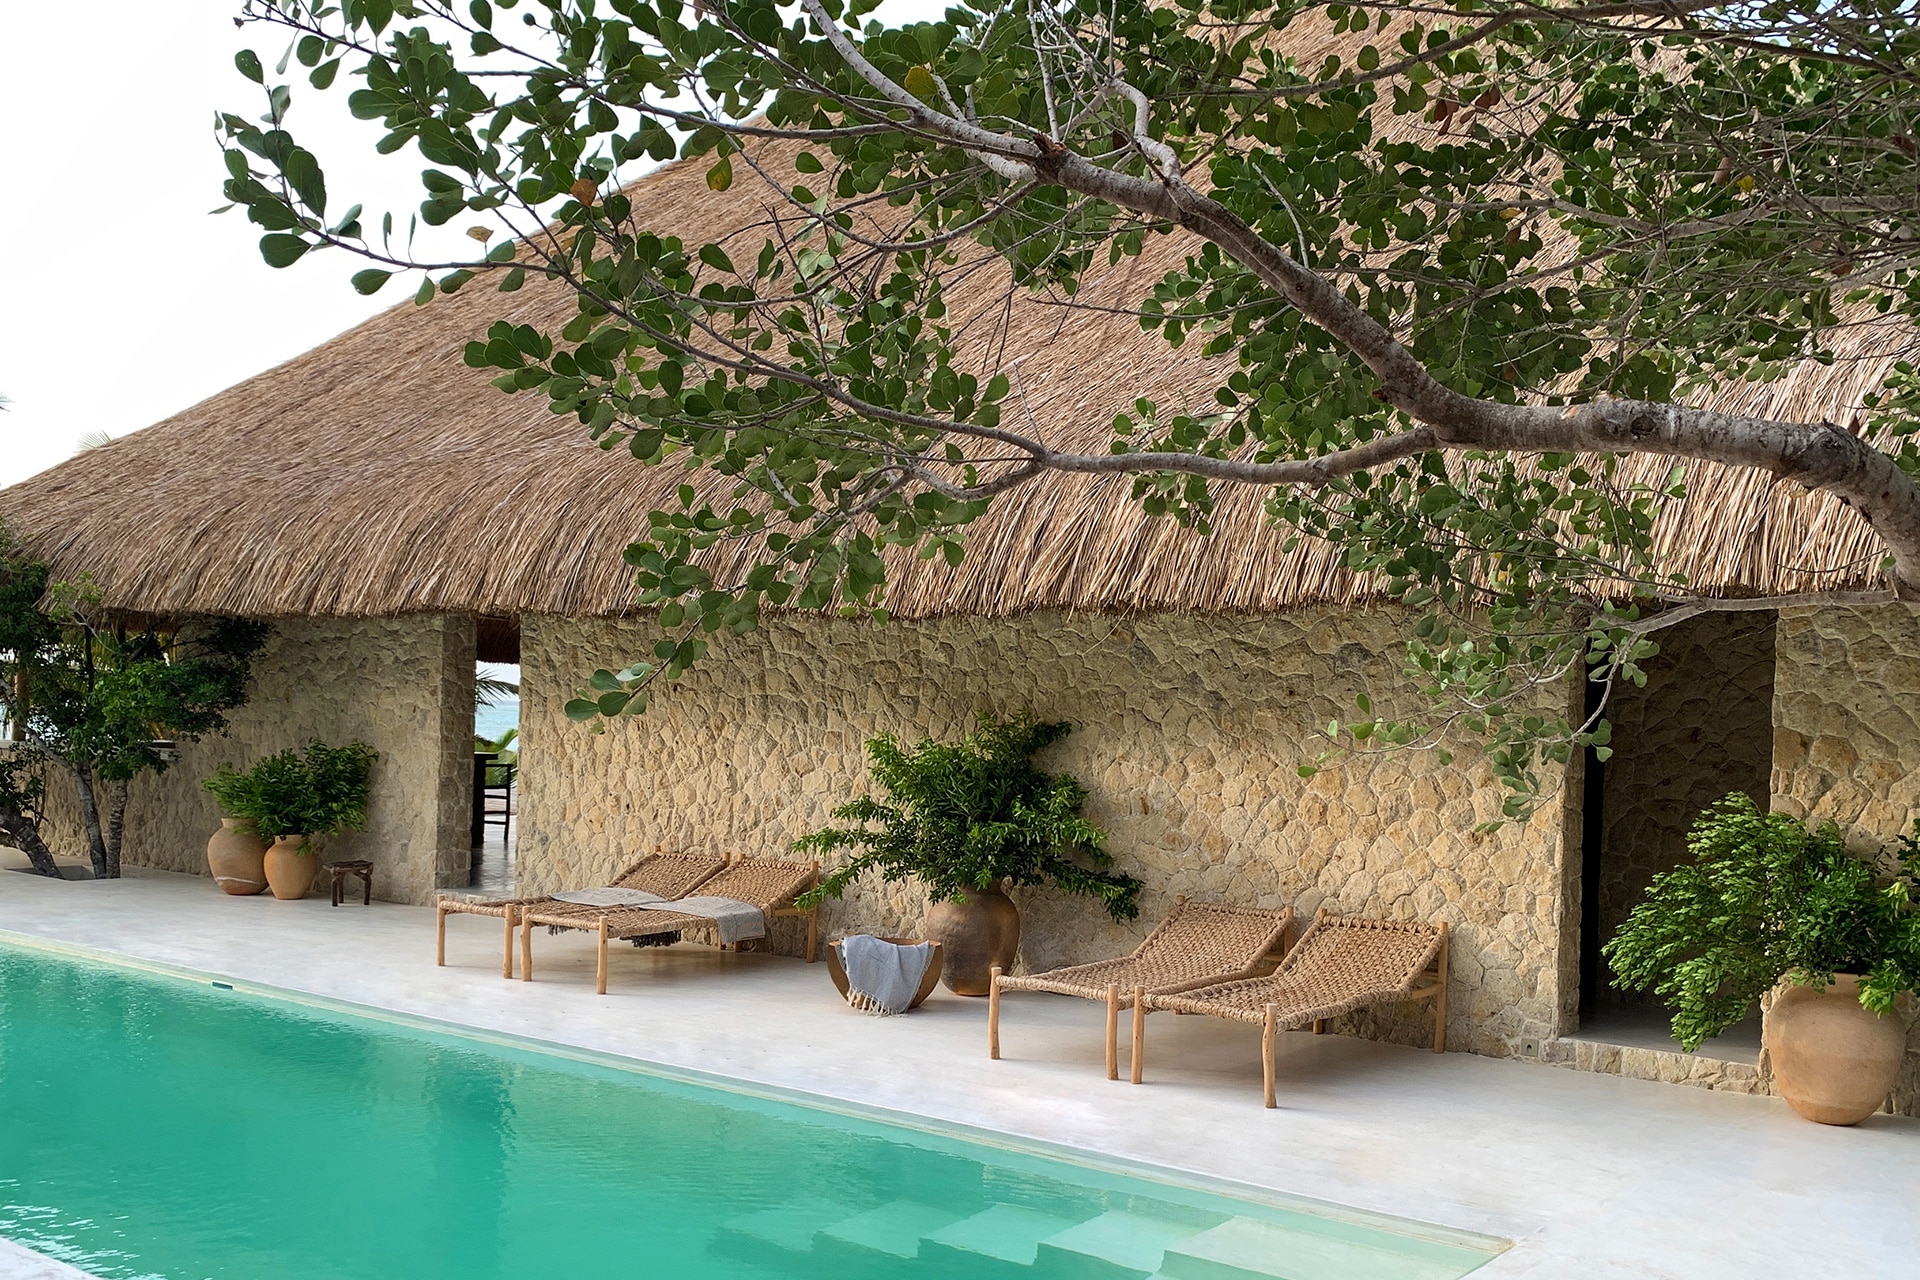 Sussorro Lodge, Mozambique - luxury lodges in Africa